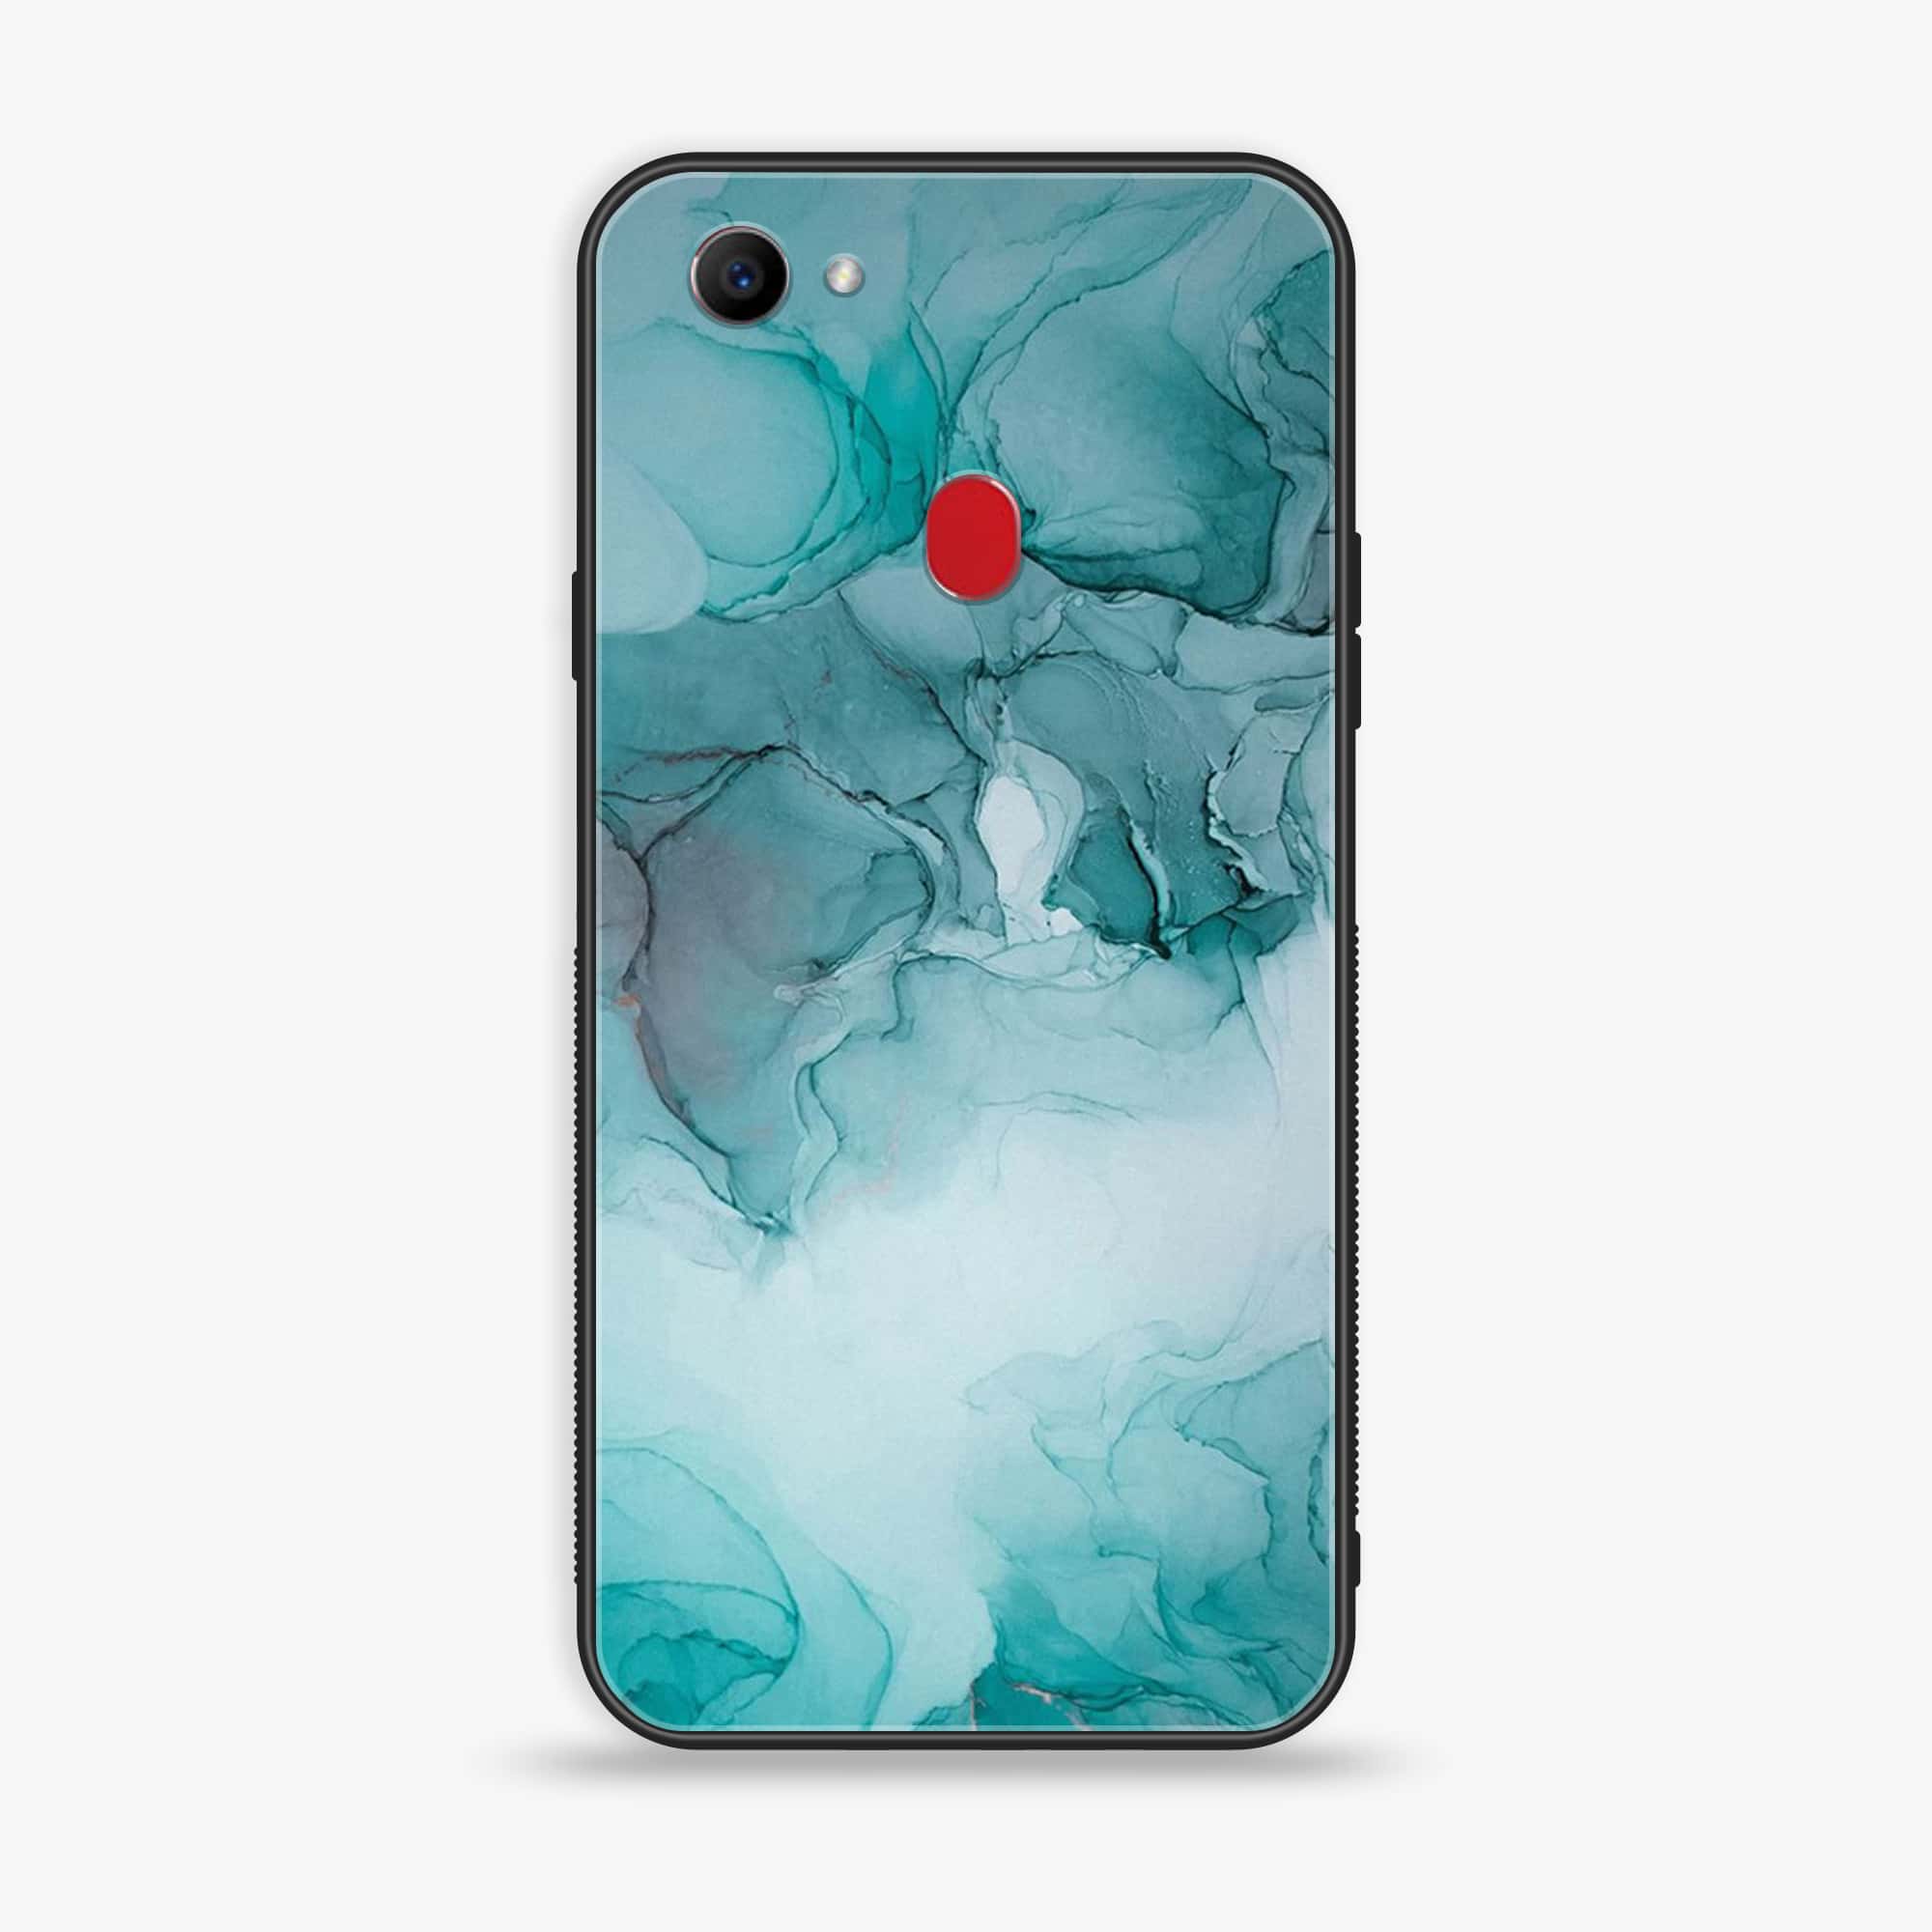 Oppo F7 - Blue Marble Series - Premium Printed Glass soft Bumper shock Proof Case